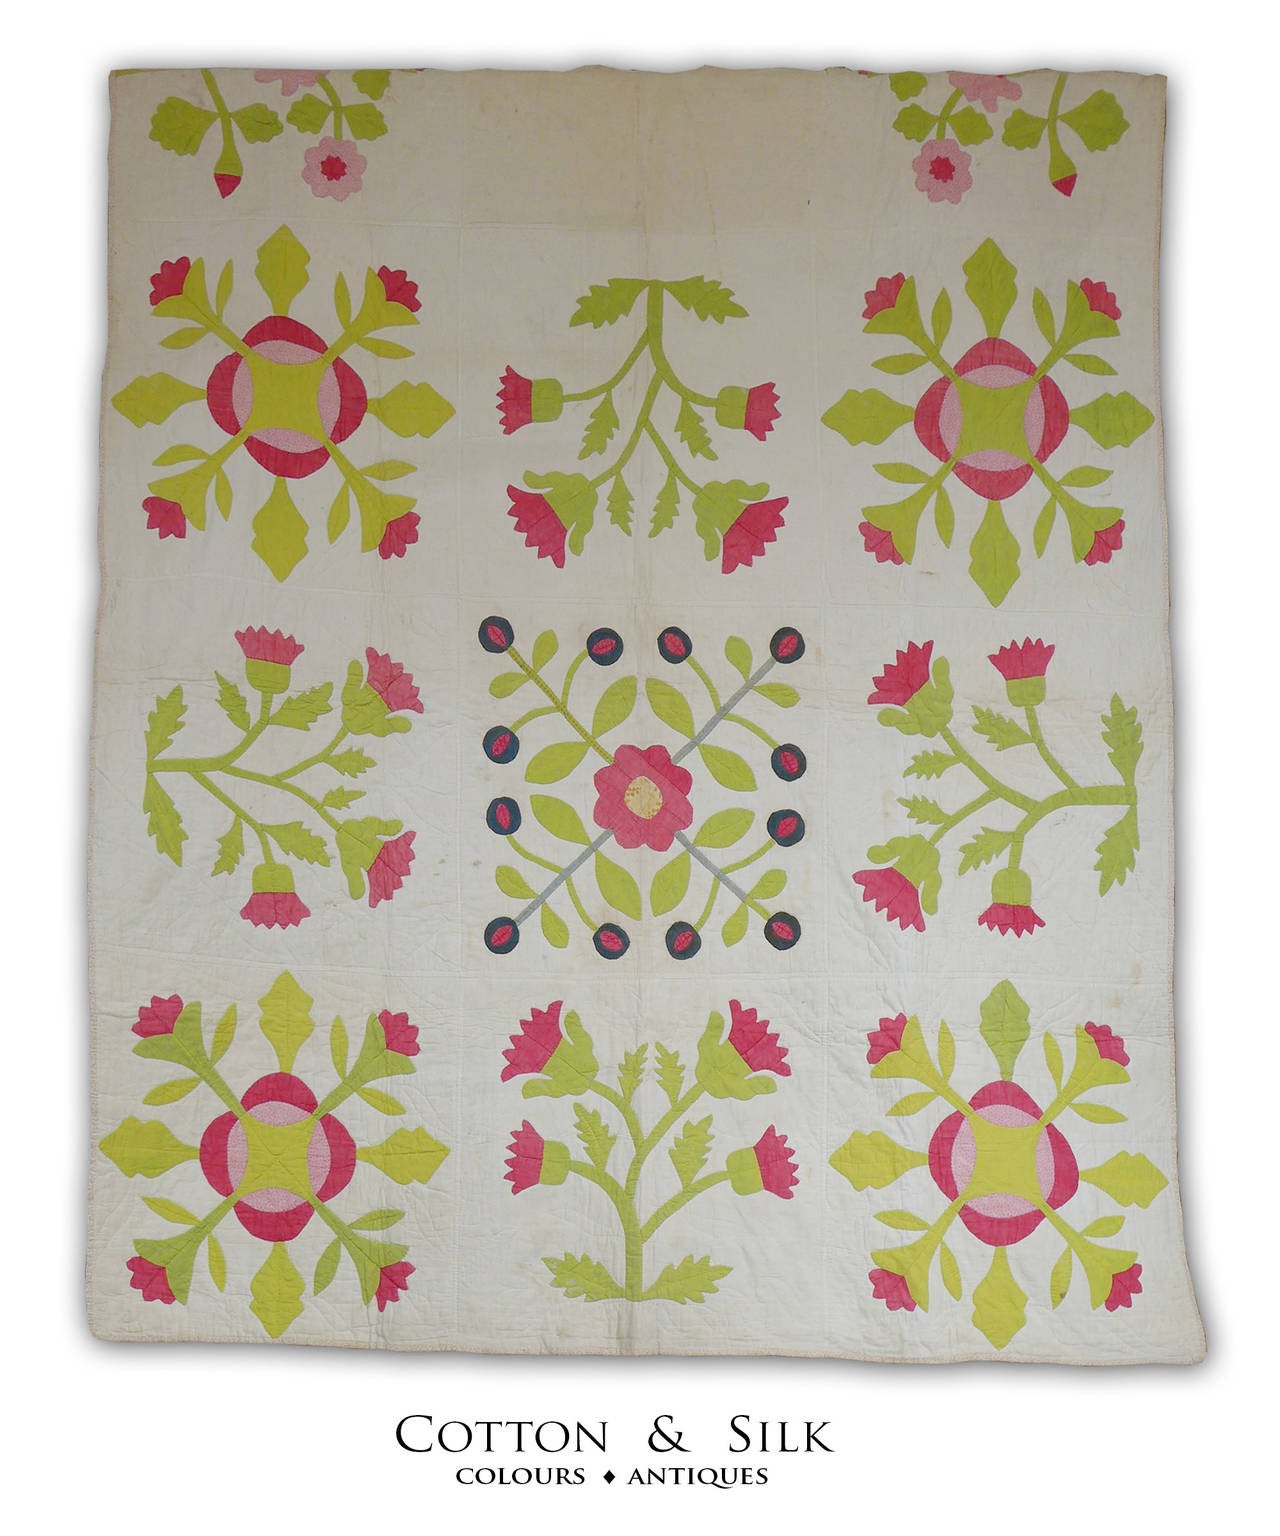 A beautiful applique quilt with red flowers and lime green leaves.